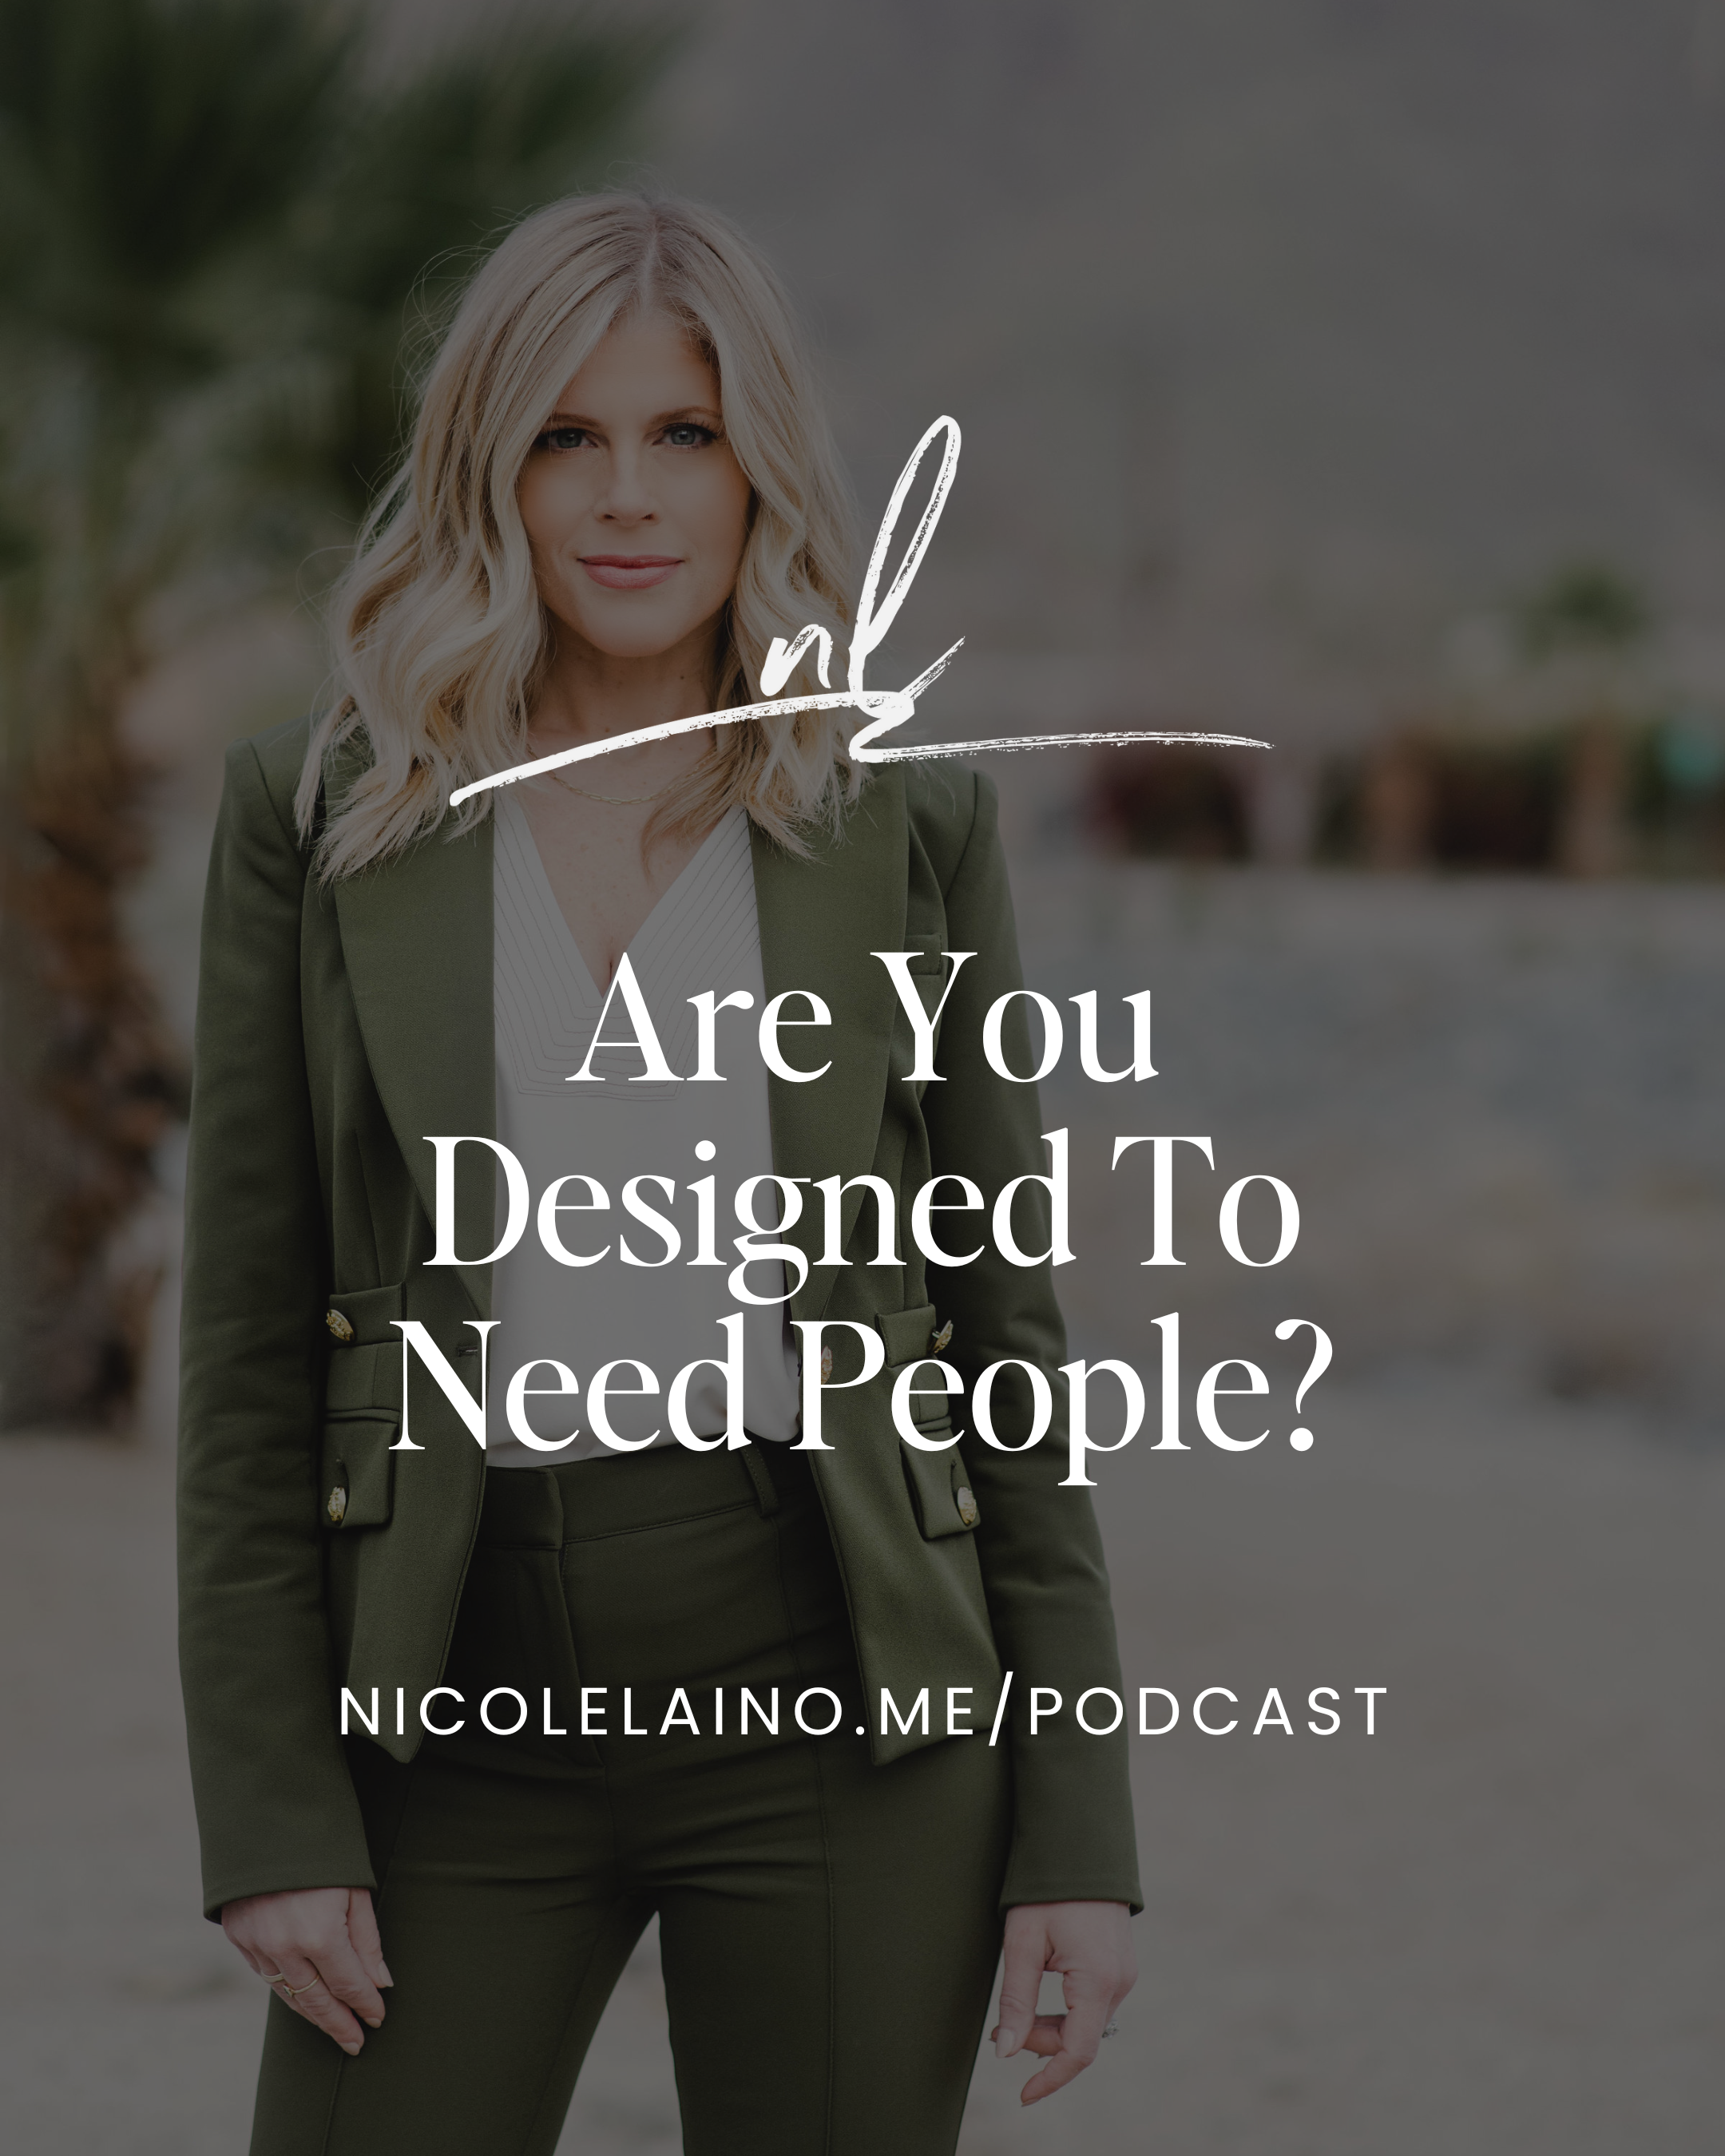 Are You Designed To Need People?